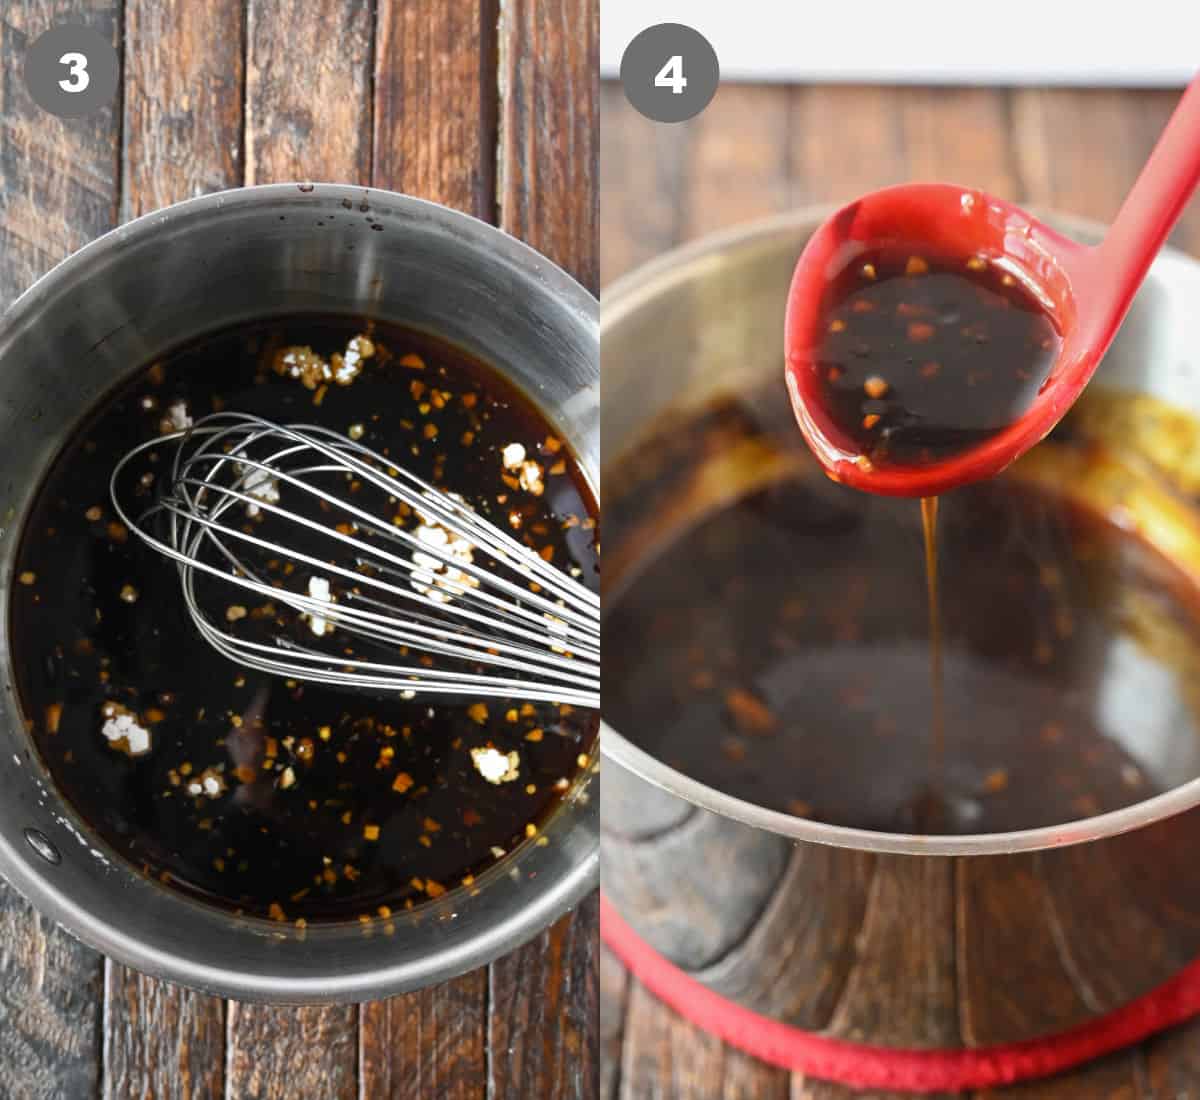 Teriyaki marinade in a bowl and then cooked in a saucepan.